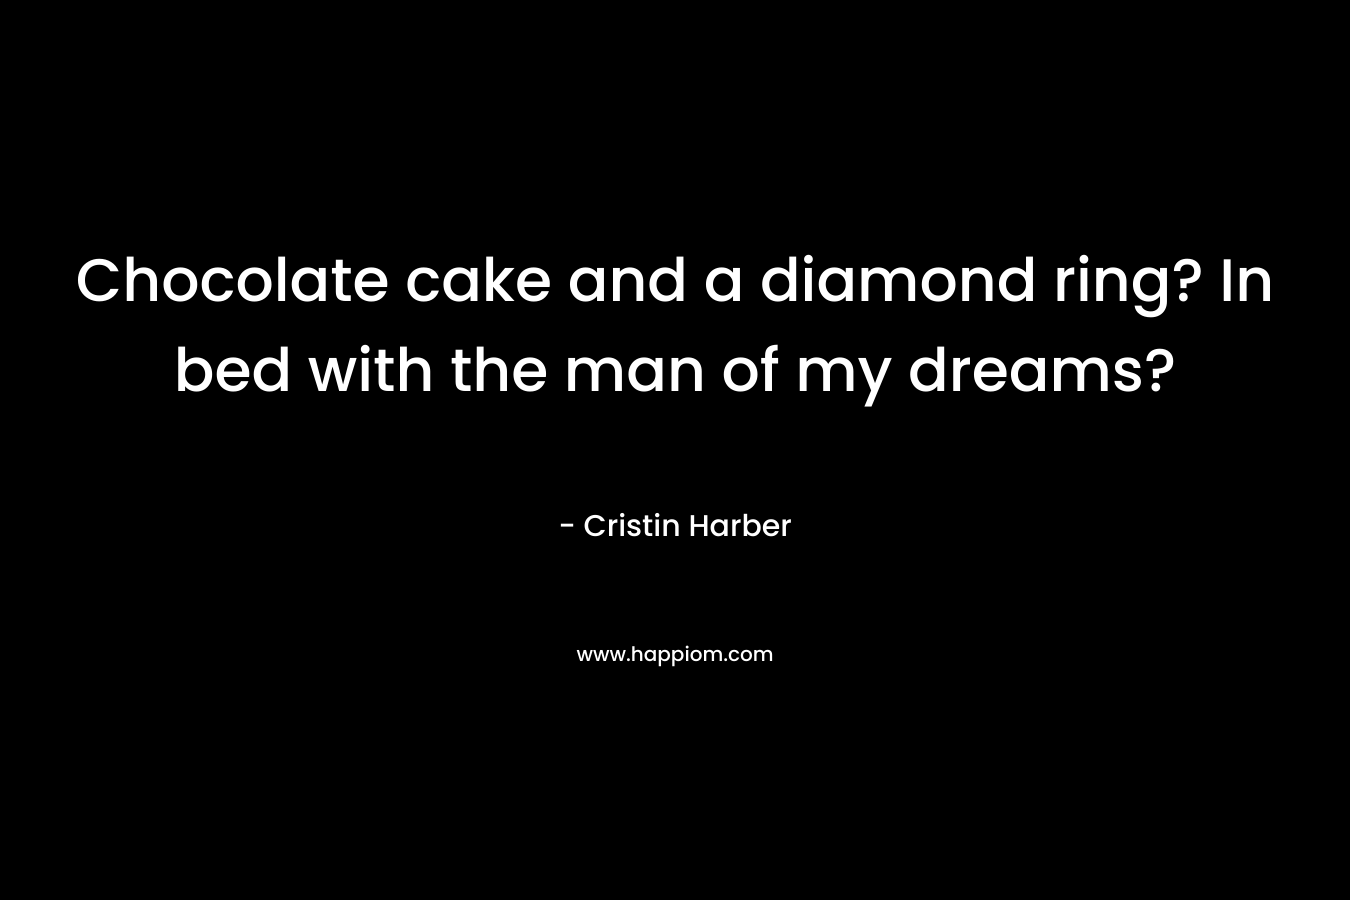 Chocolate cake and a diamond ring? In bed with the man of my dreams?